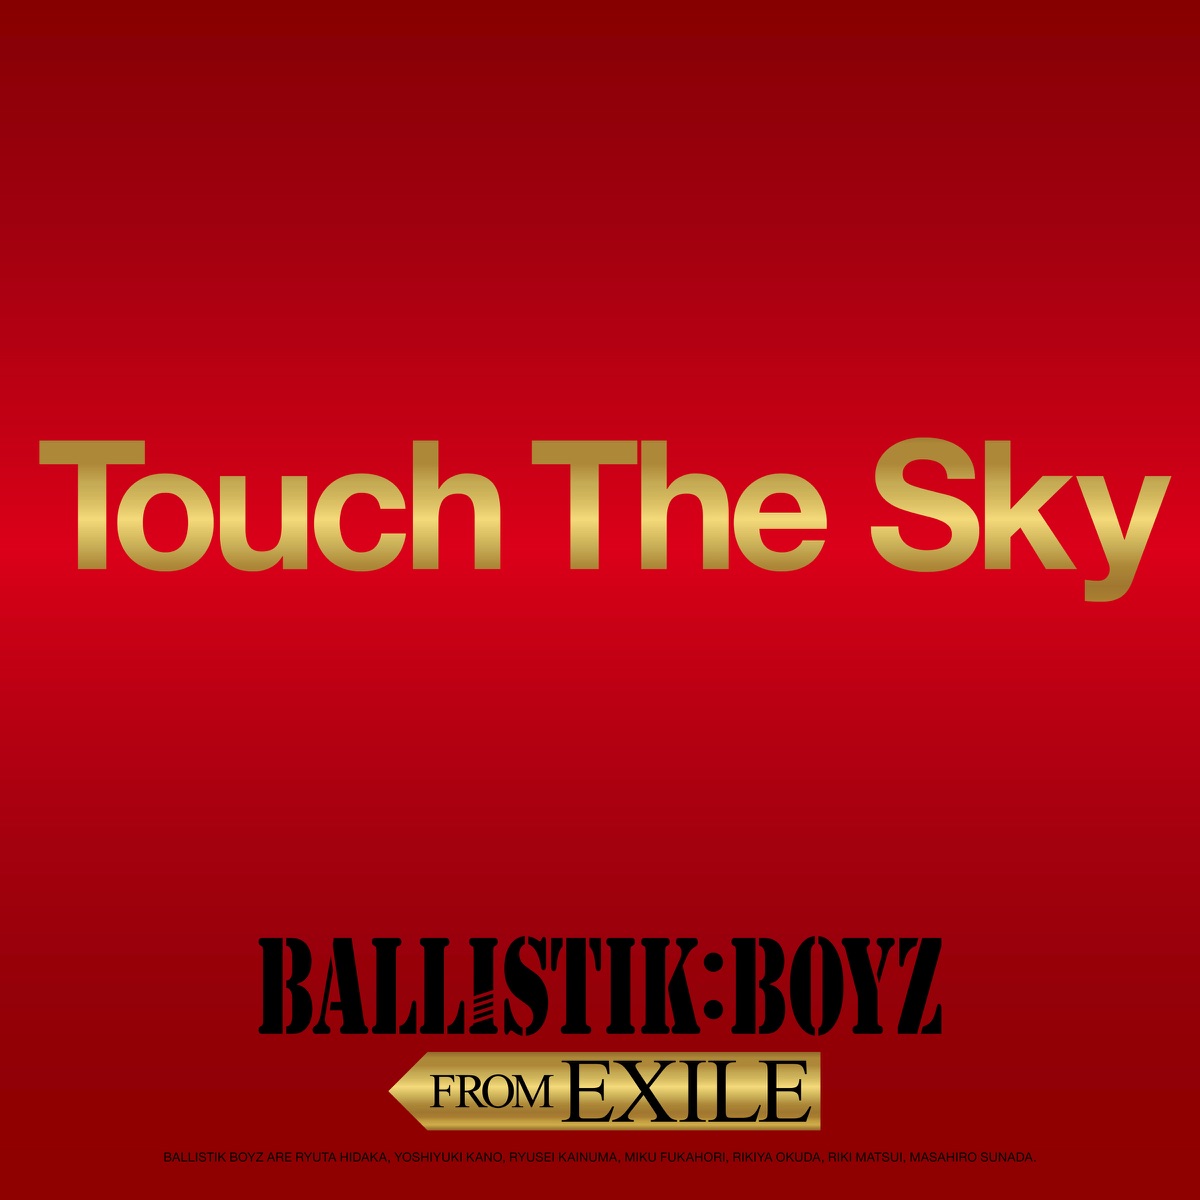 Cover art for『BALLISTIK BOYZ from EXILE TRIBE - Touch The Sky』from the release『Touch The Sky』